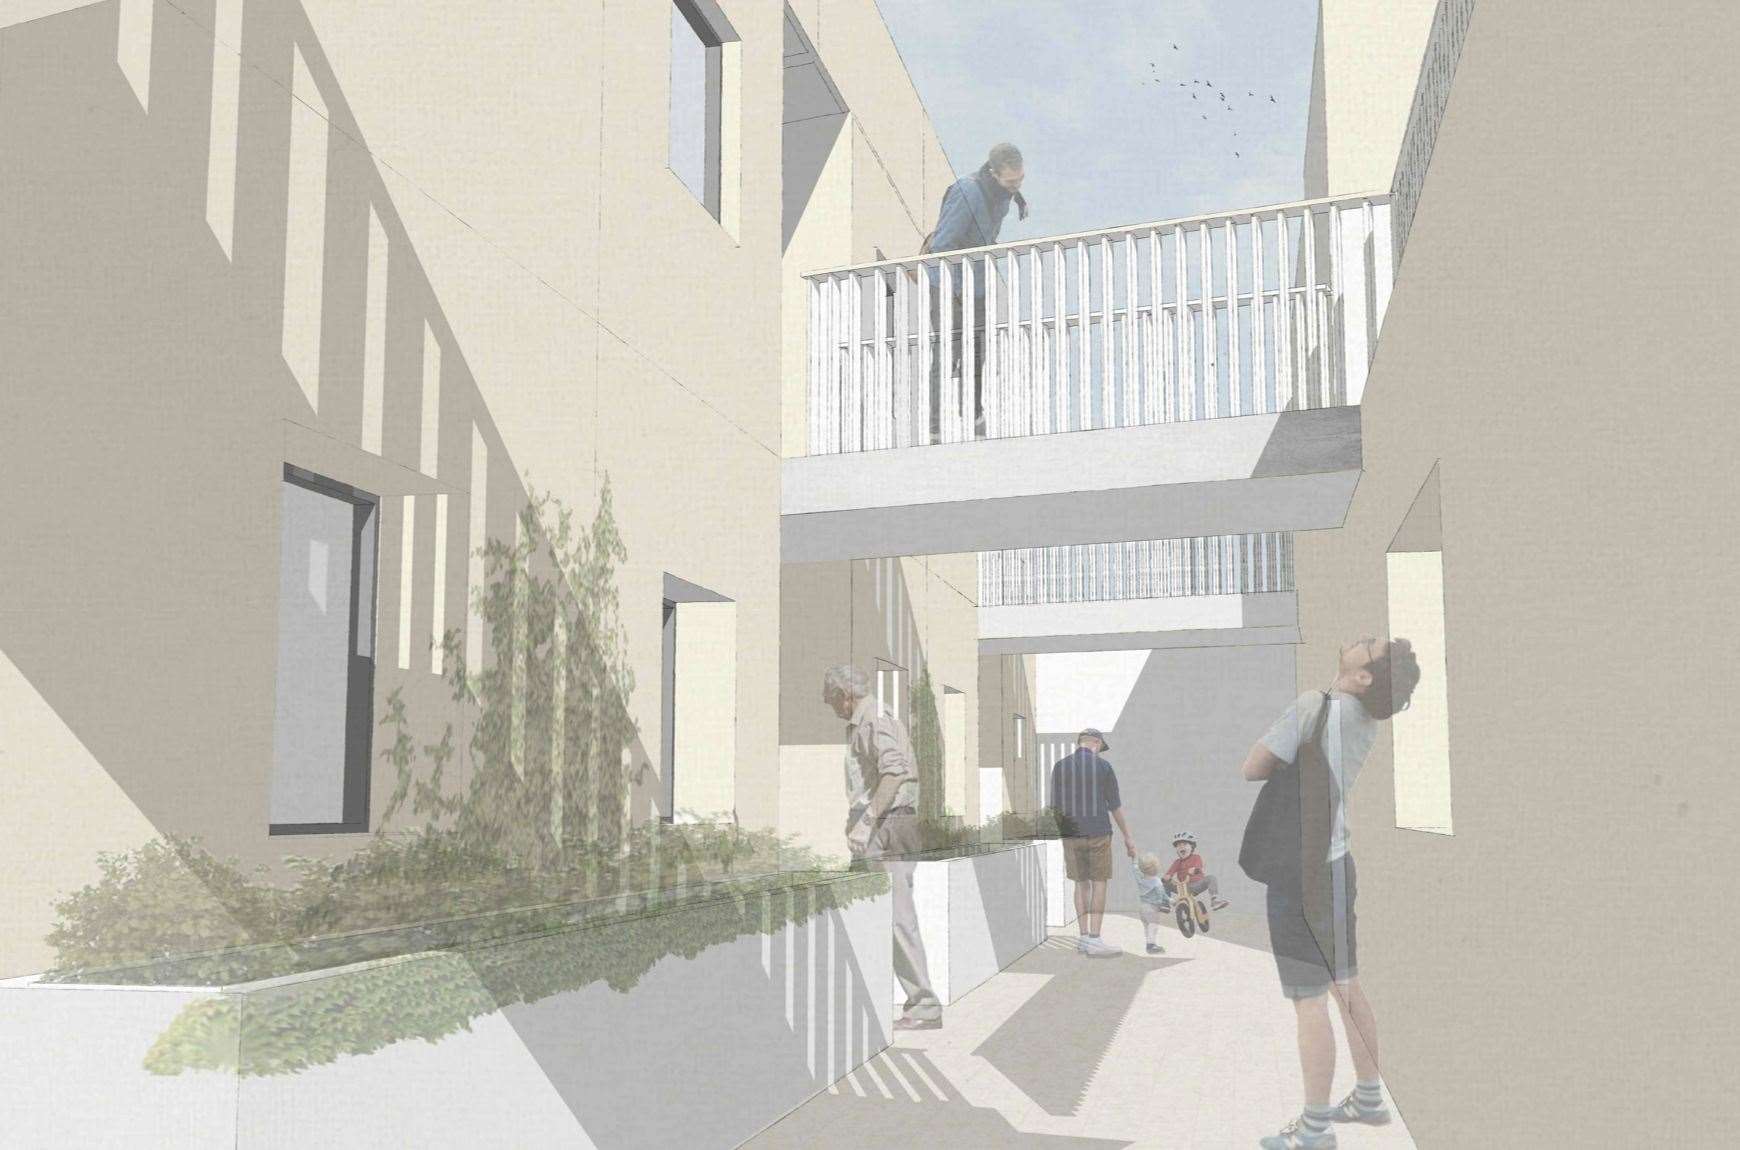 An artist's impression of what the new development in Margate High Street could look like. Picture: Black Architecture